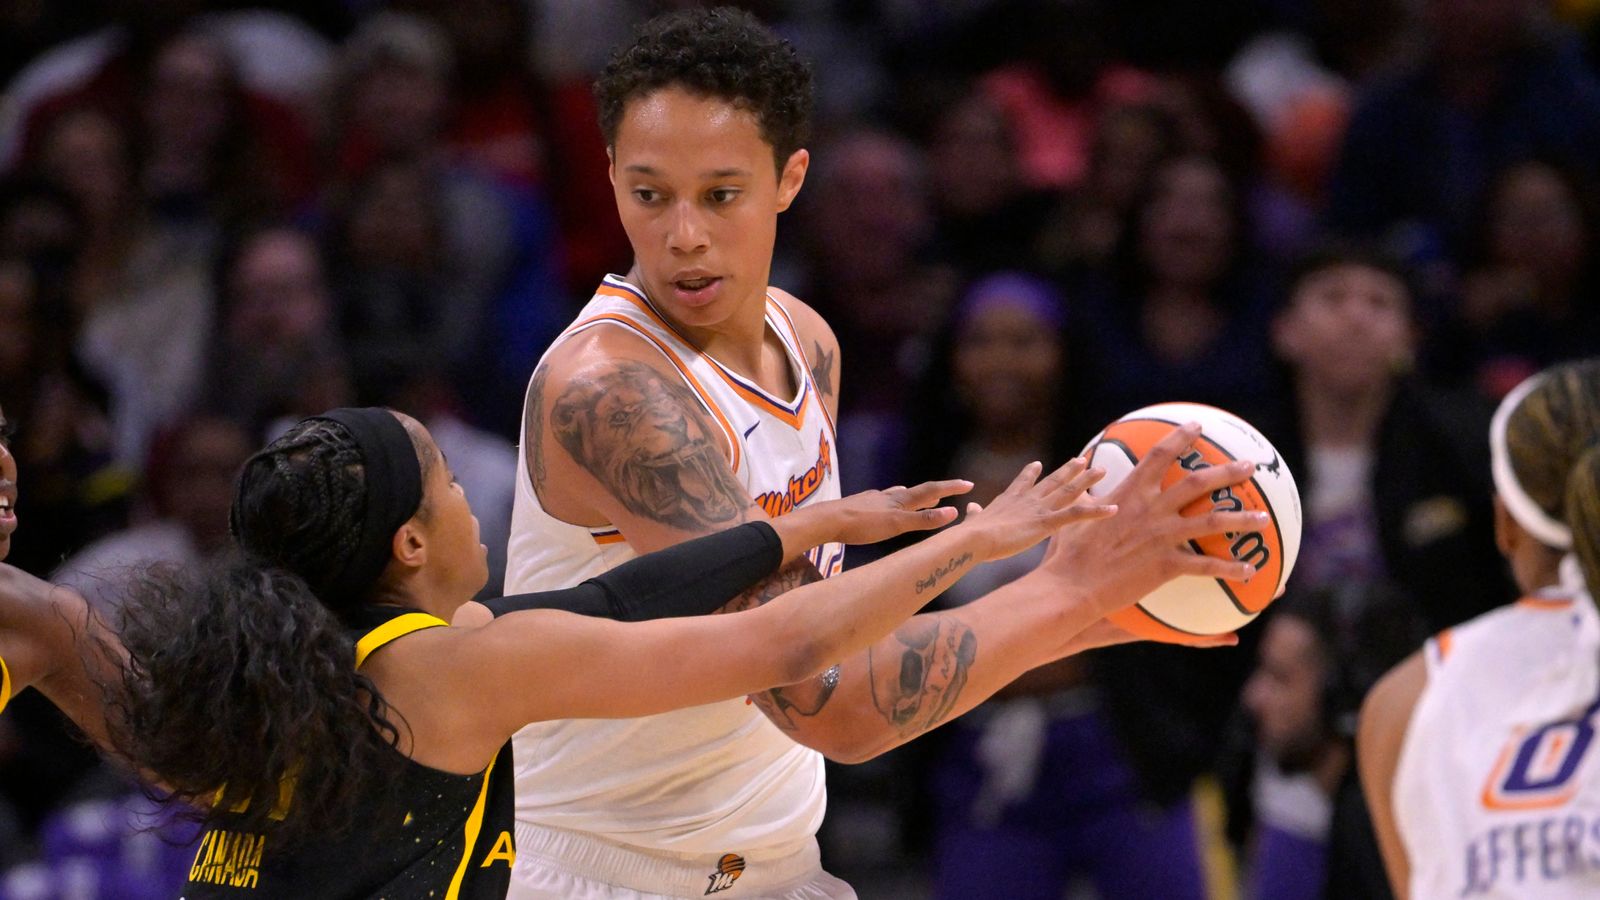 Brittney Griner plays first professional league game since release from Russian jail